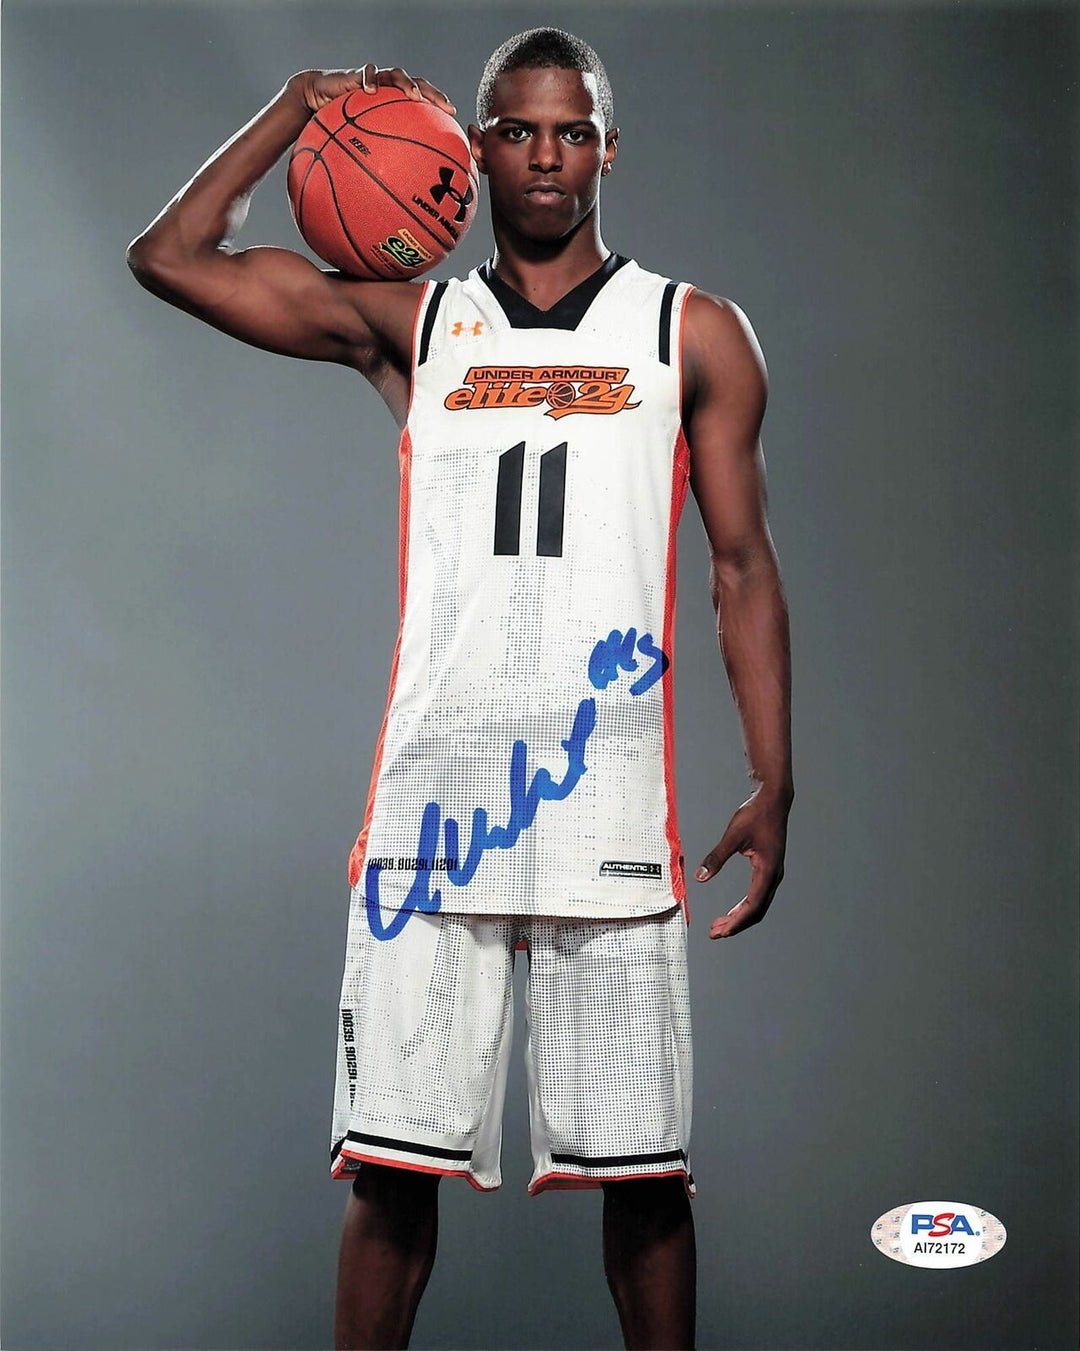 ISAIAH WHITEHEAD signed 8x10 photo PSA/DNA Brooklyn Nets Autographed Image 1